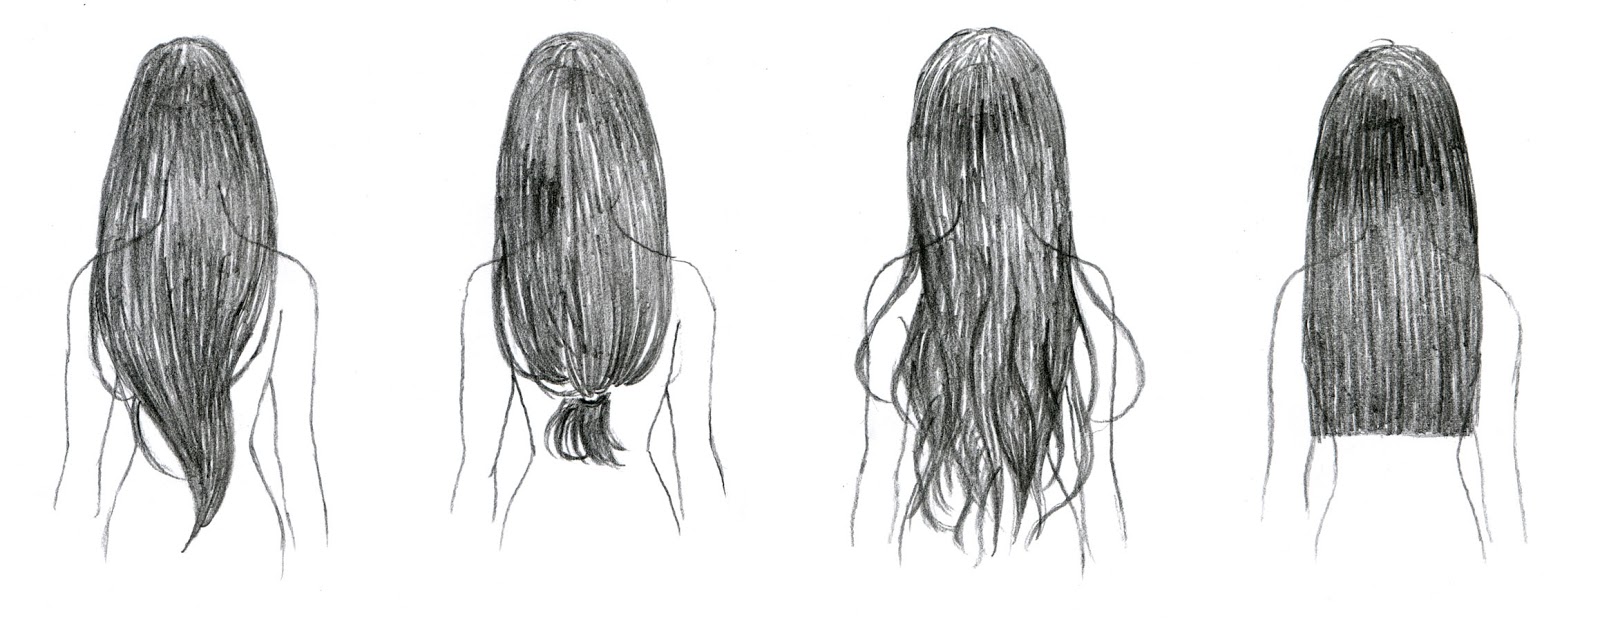 Best How To Draw Hair From The Back of the decade Check it out now 